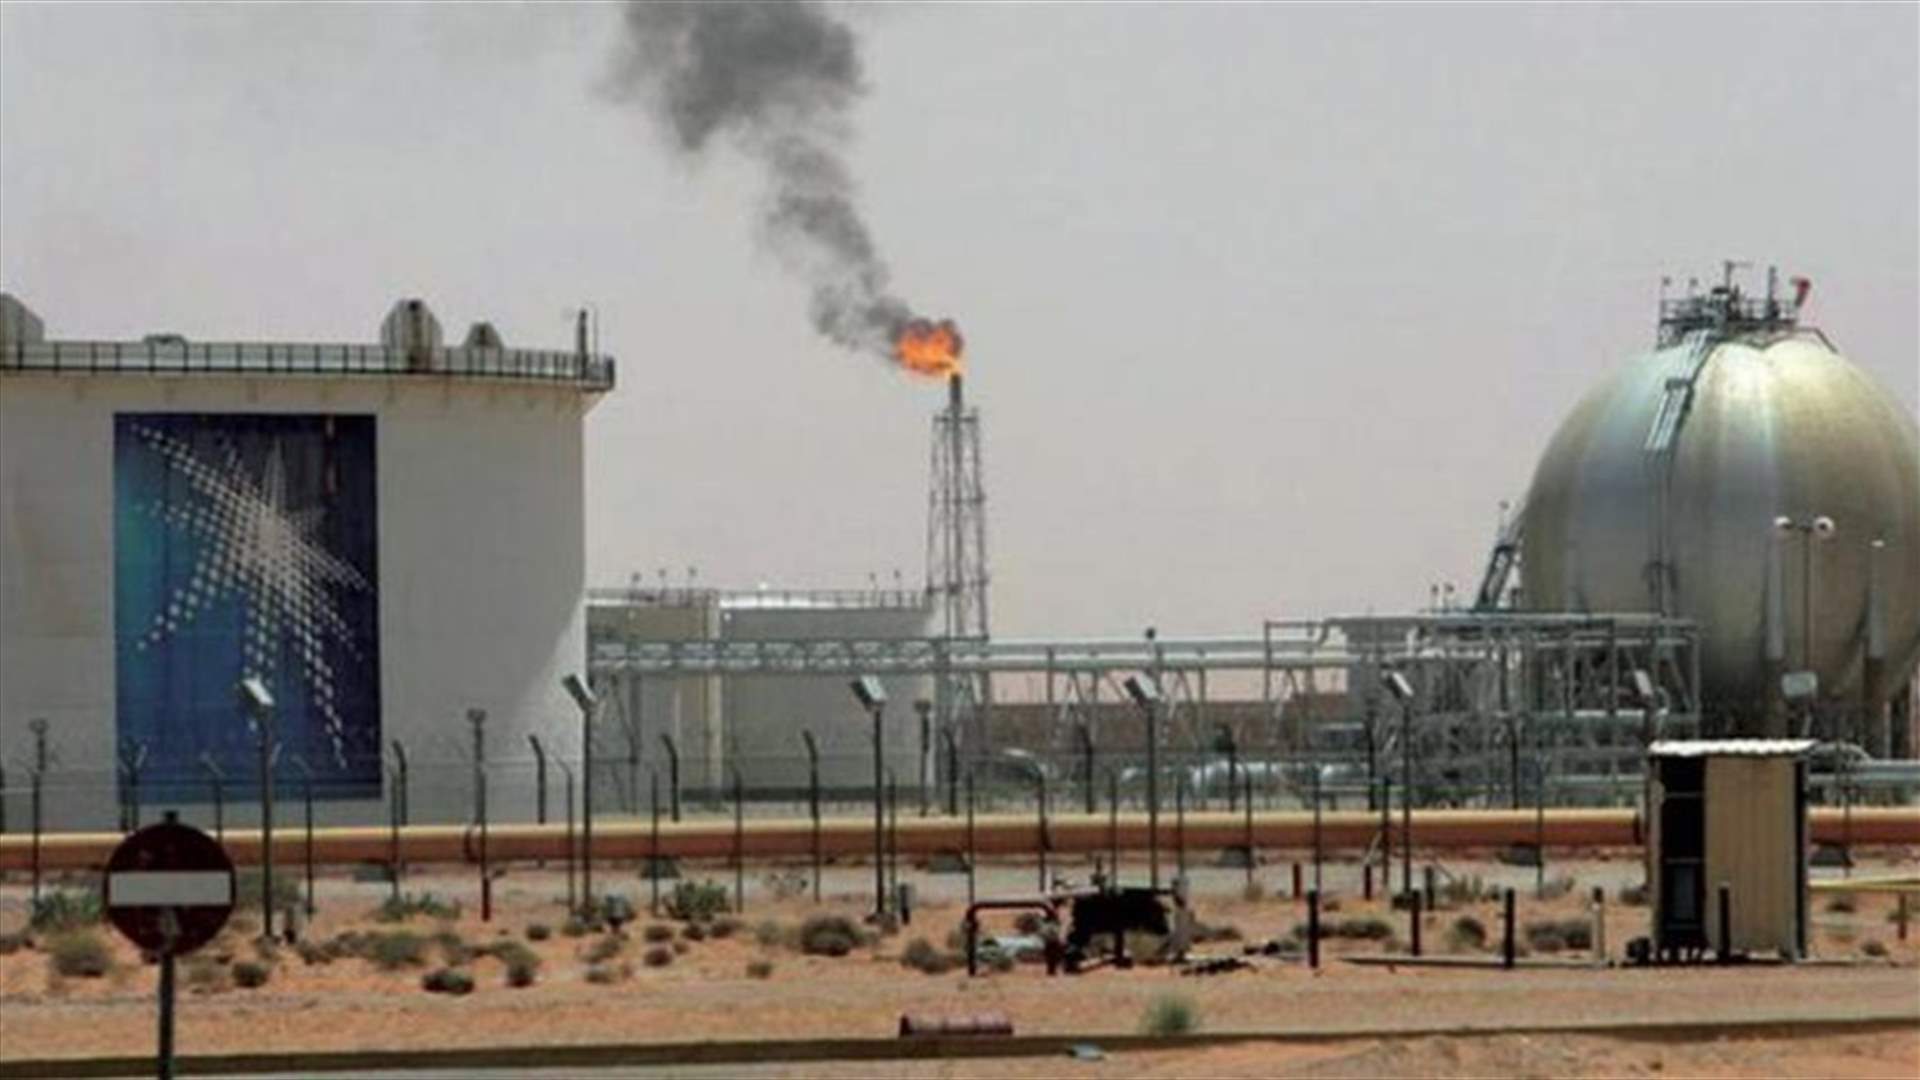 Saudi Arabia&#39;s oil supply disrupted after drone attacks - sources